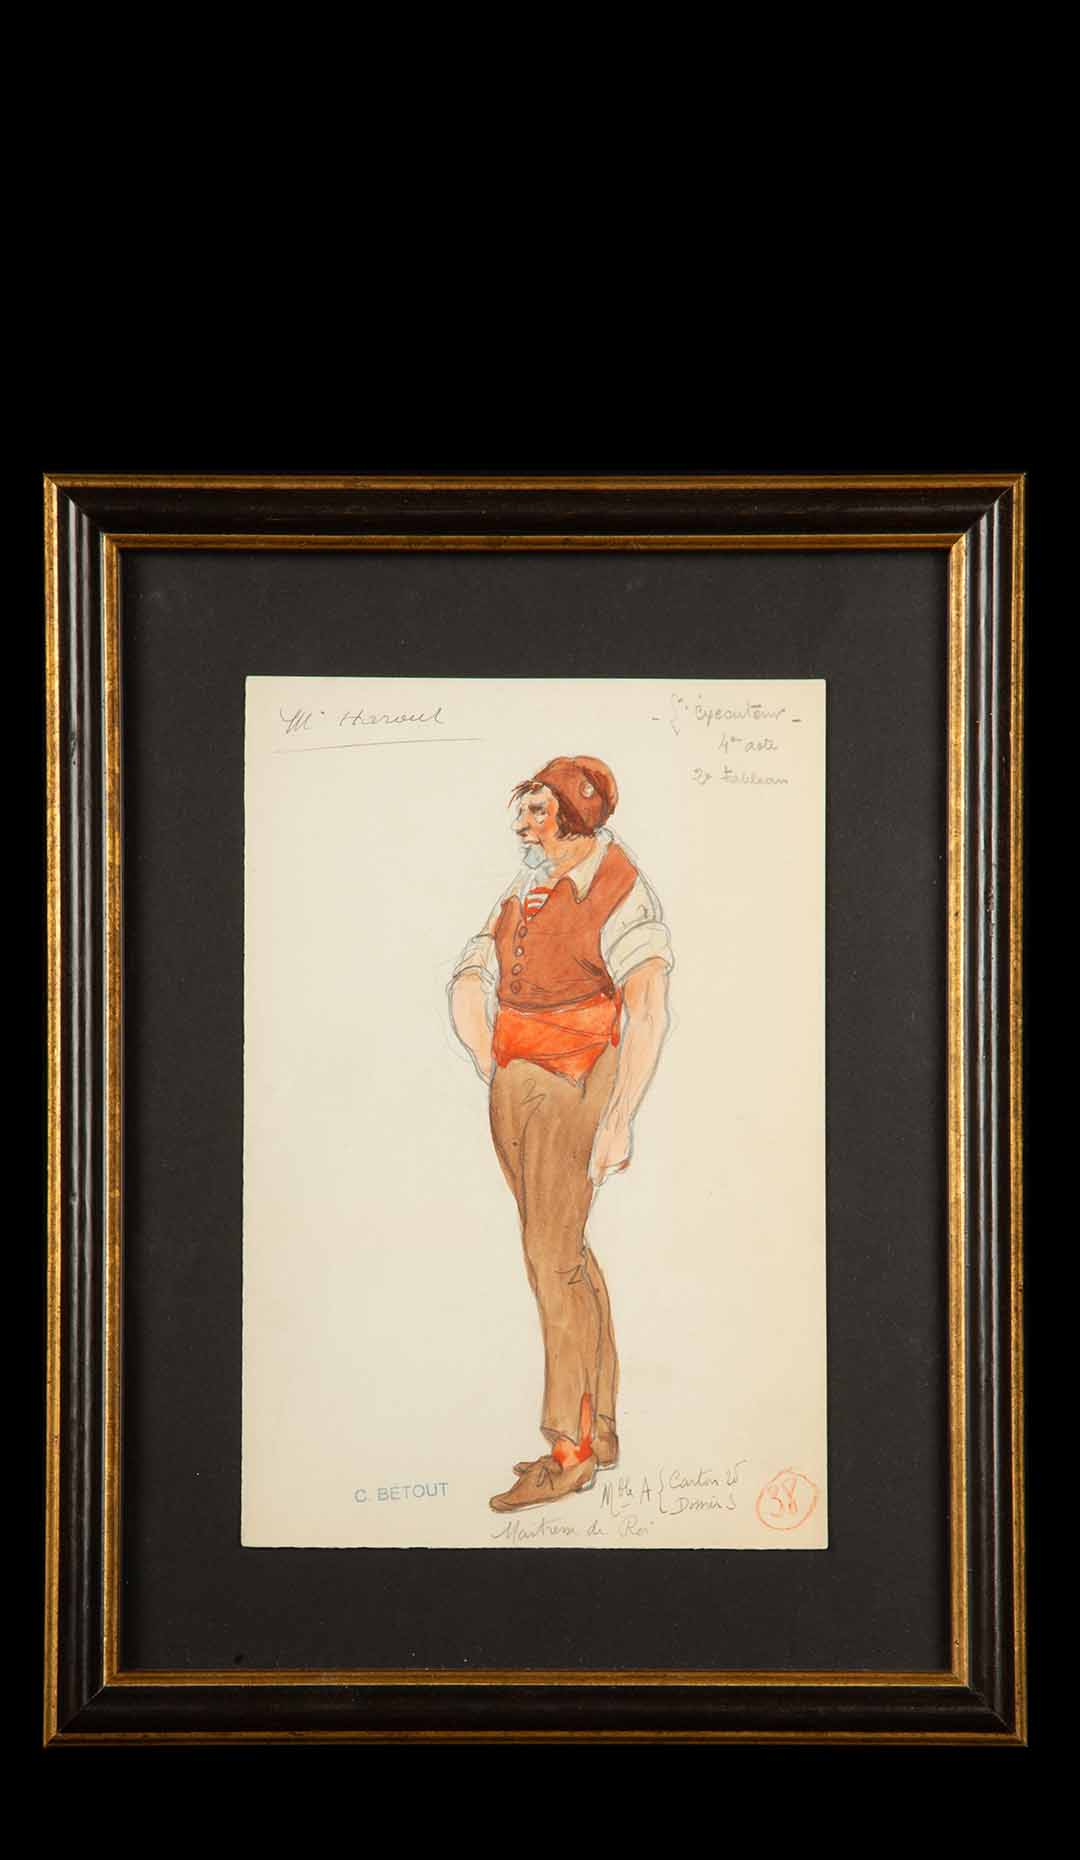 Framed Original Opera Costume Design Water Color, By Charles Betout 2